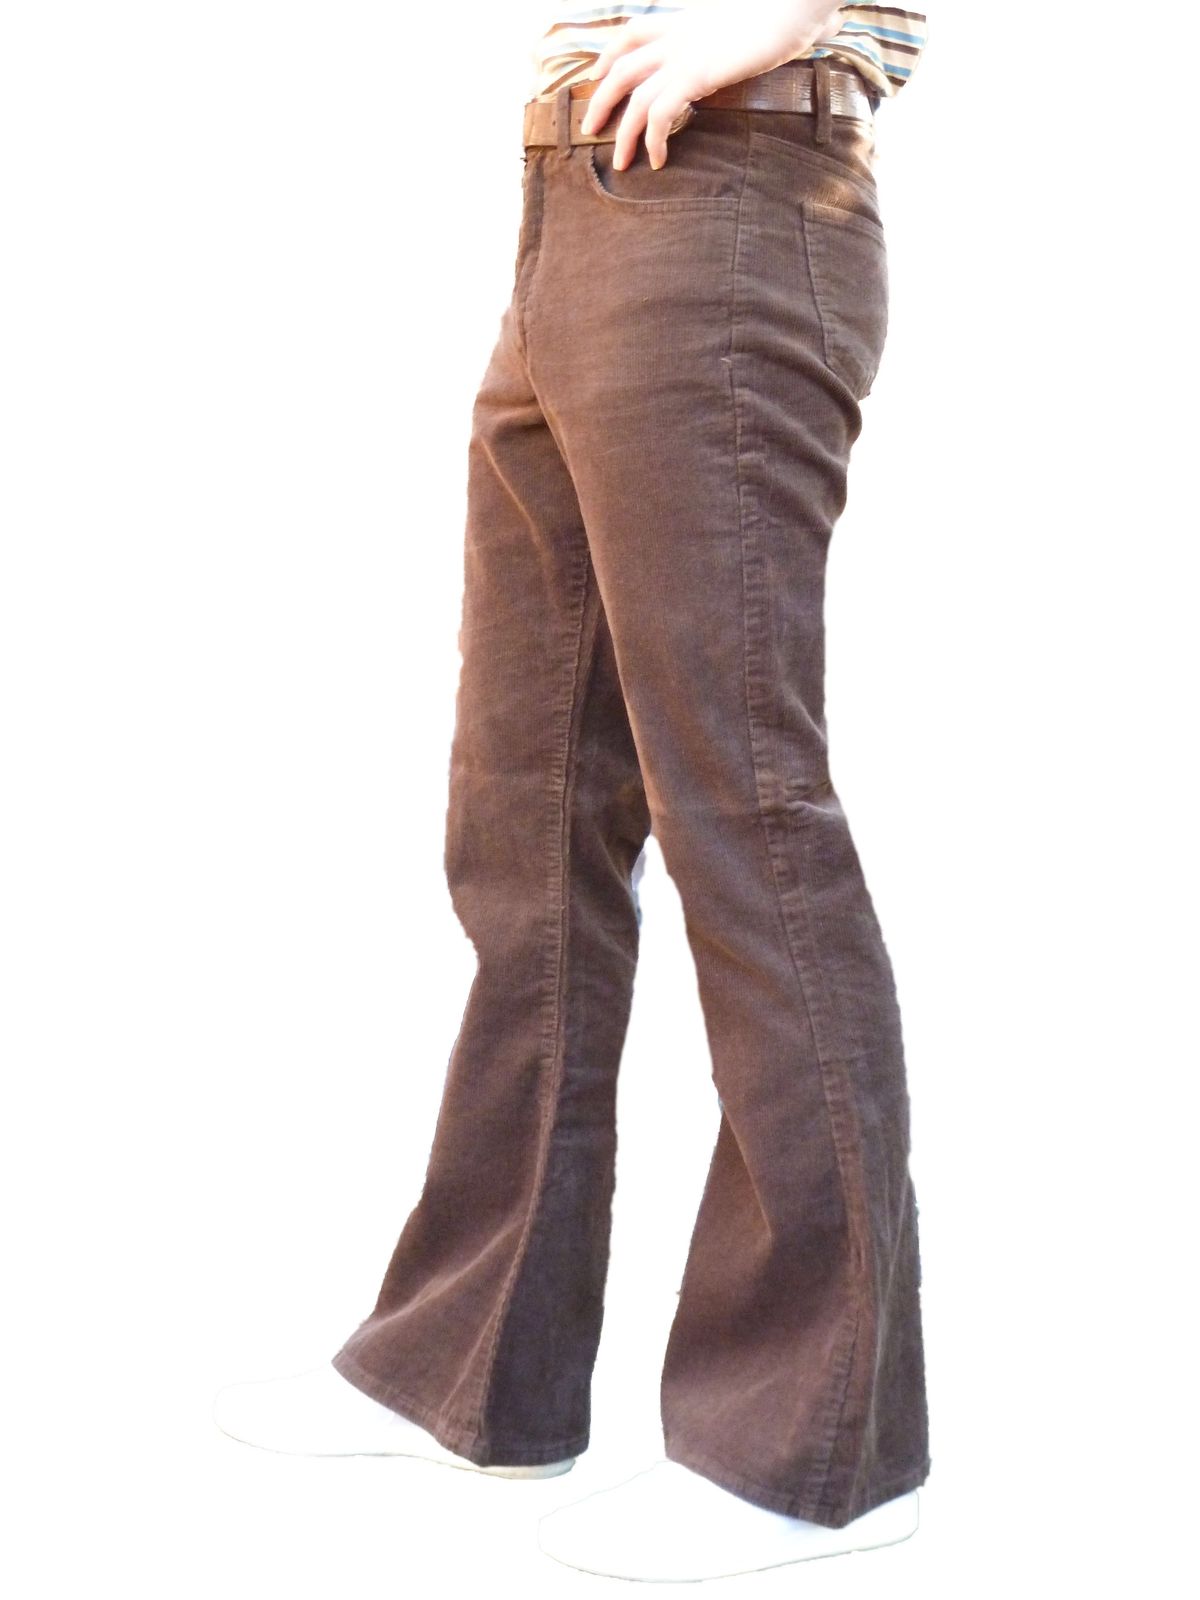 Mens Flares Brown Corduroy Flared Bell Bottoms Pants High Rise Hippie ...